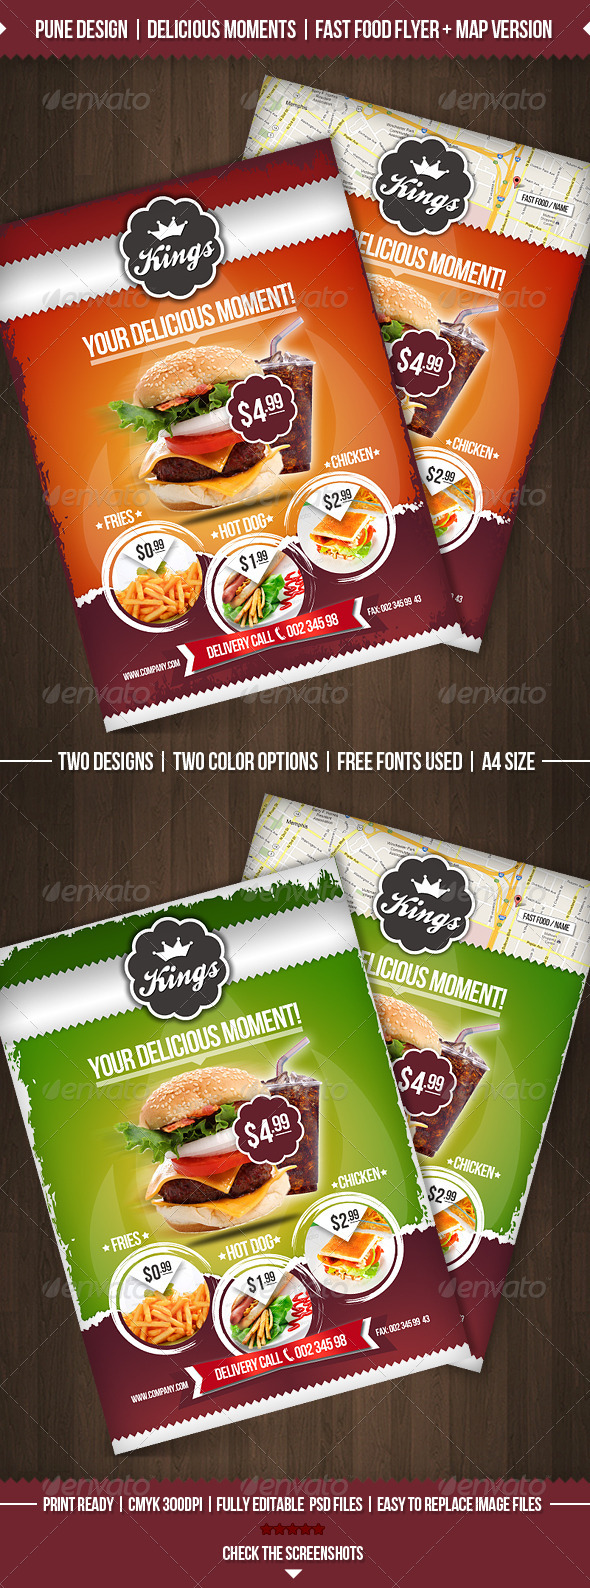 Delicious Moments | Fast Food Flyer Template